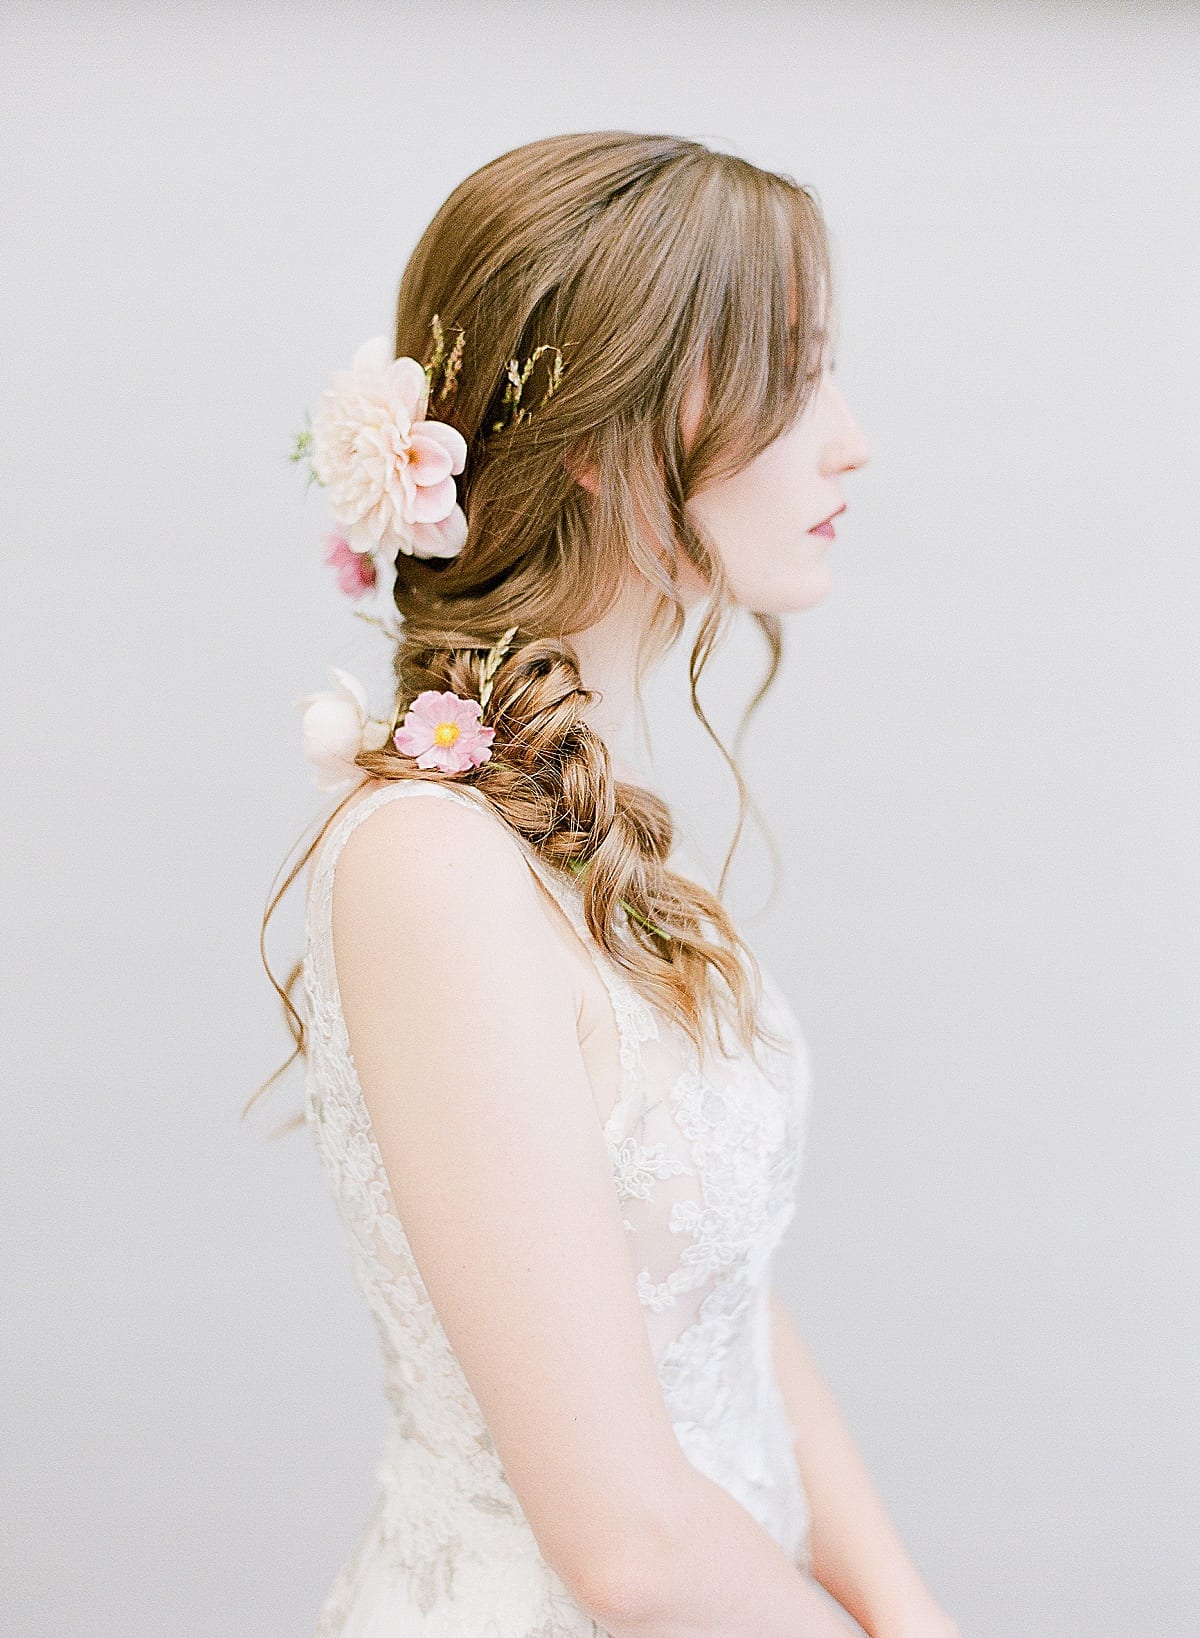 Wedding Hair and Makeup Bride's Hair Braided with Flowers Photo